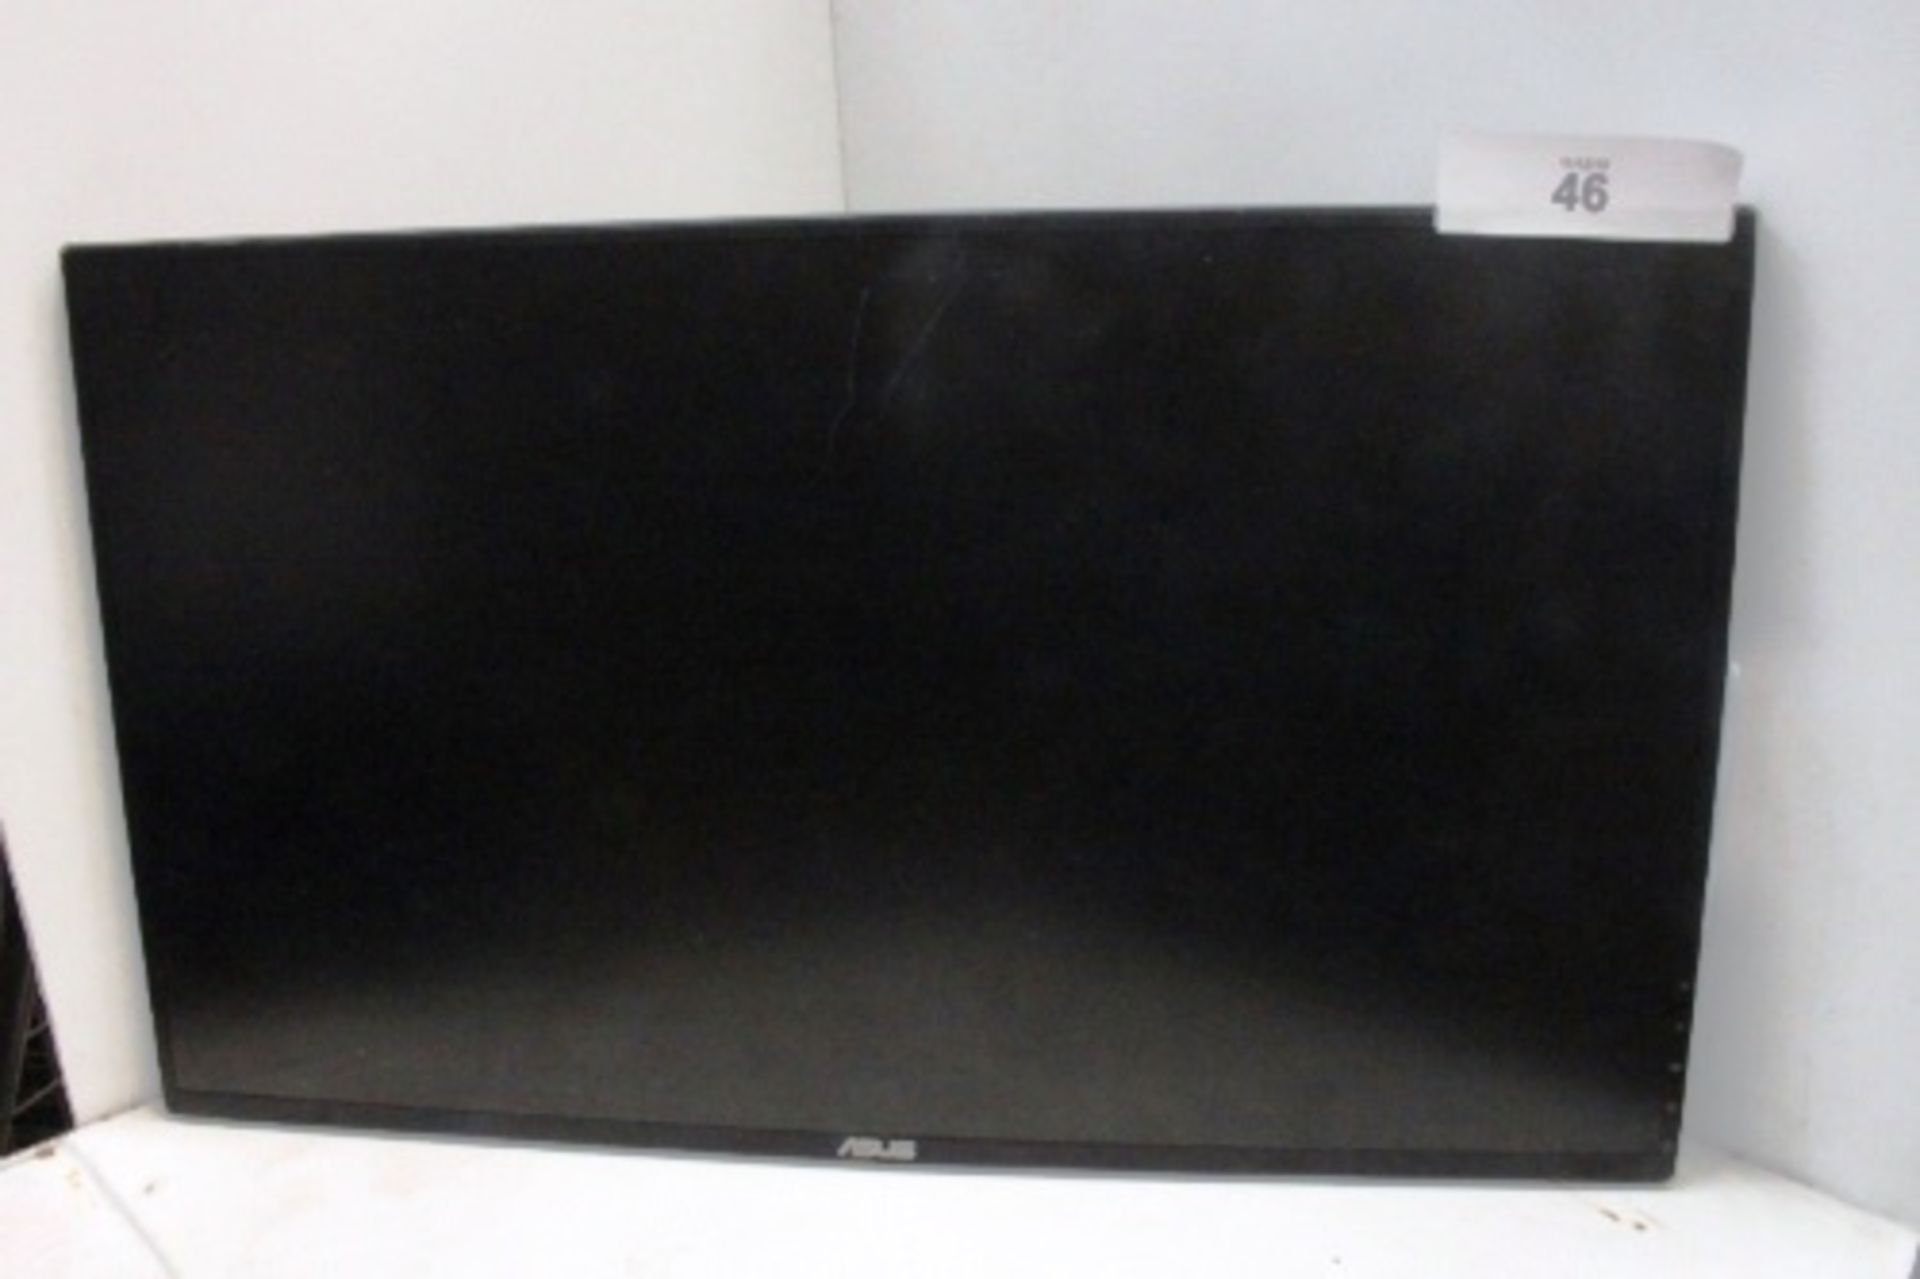 An incomplete Asus Rog Swift PG278Q 27" widescreen gaming monitor, untested - Spares and repairs